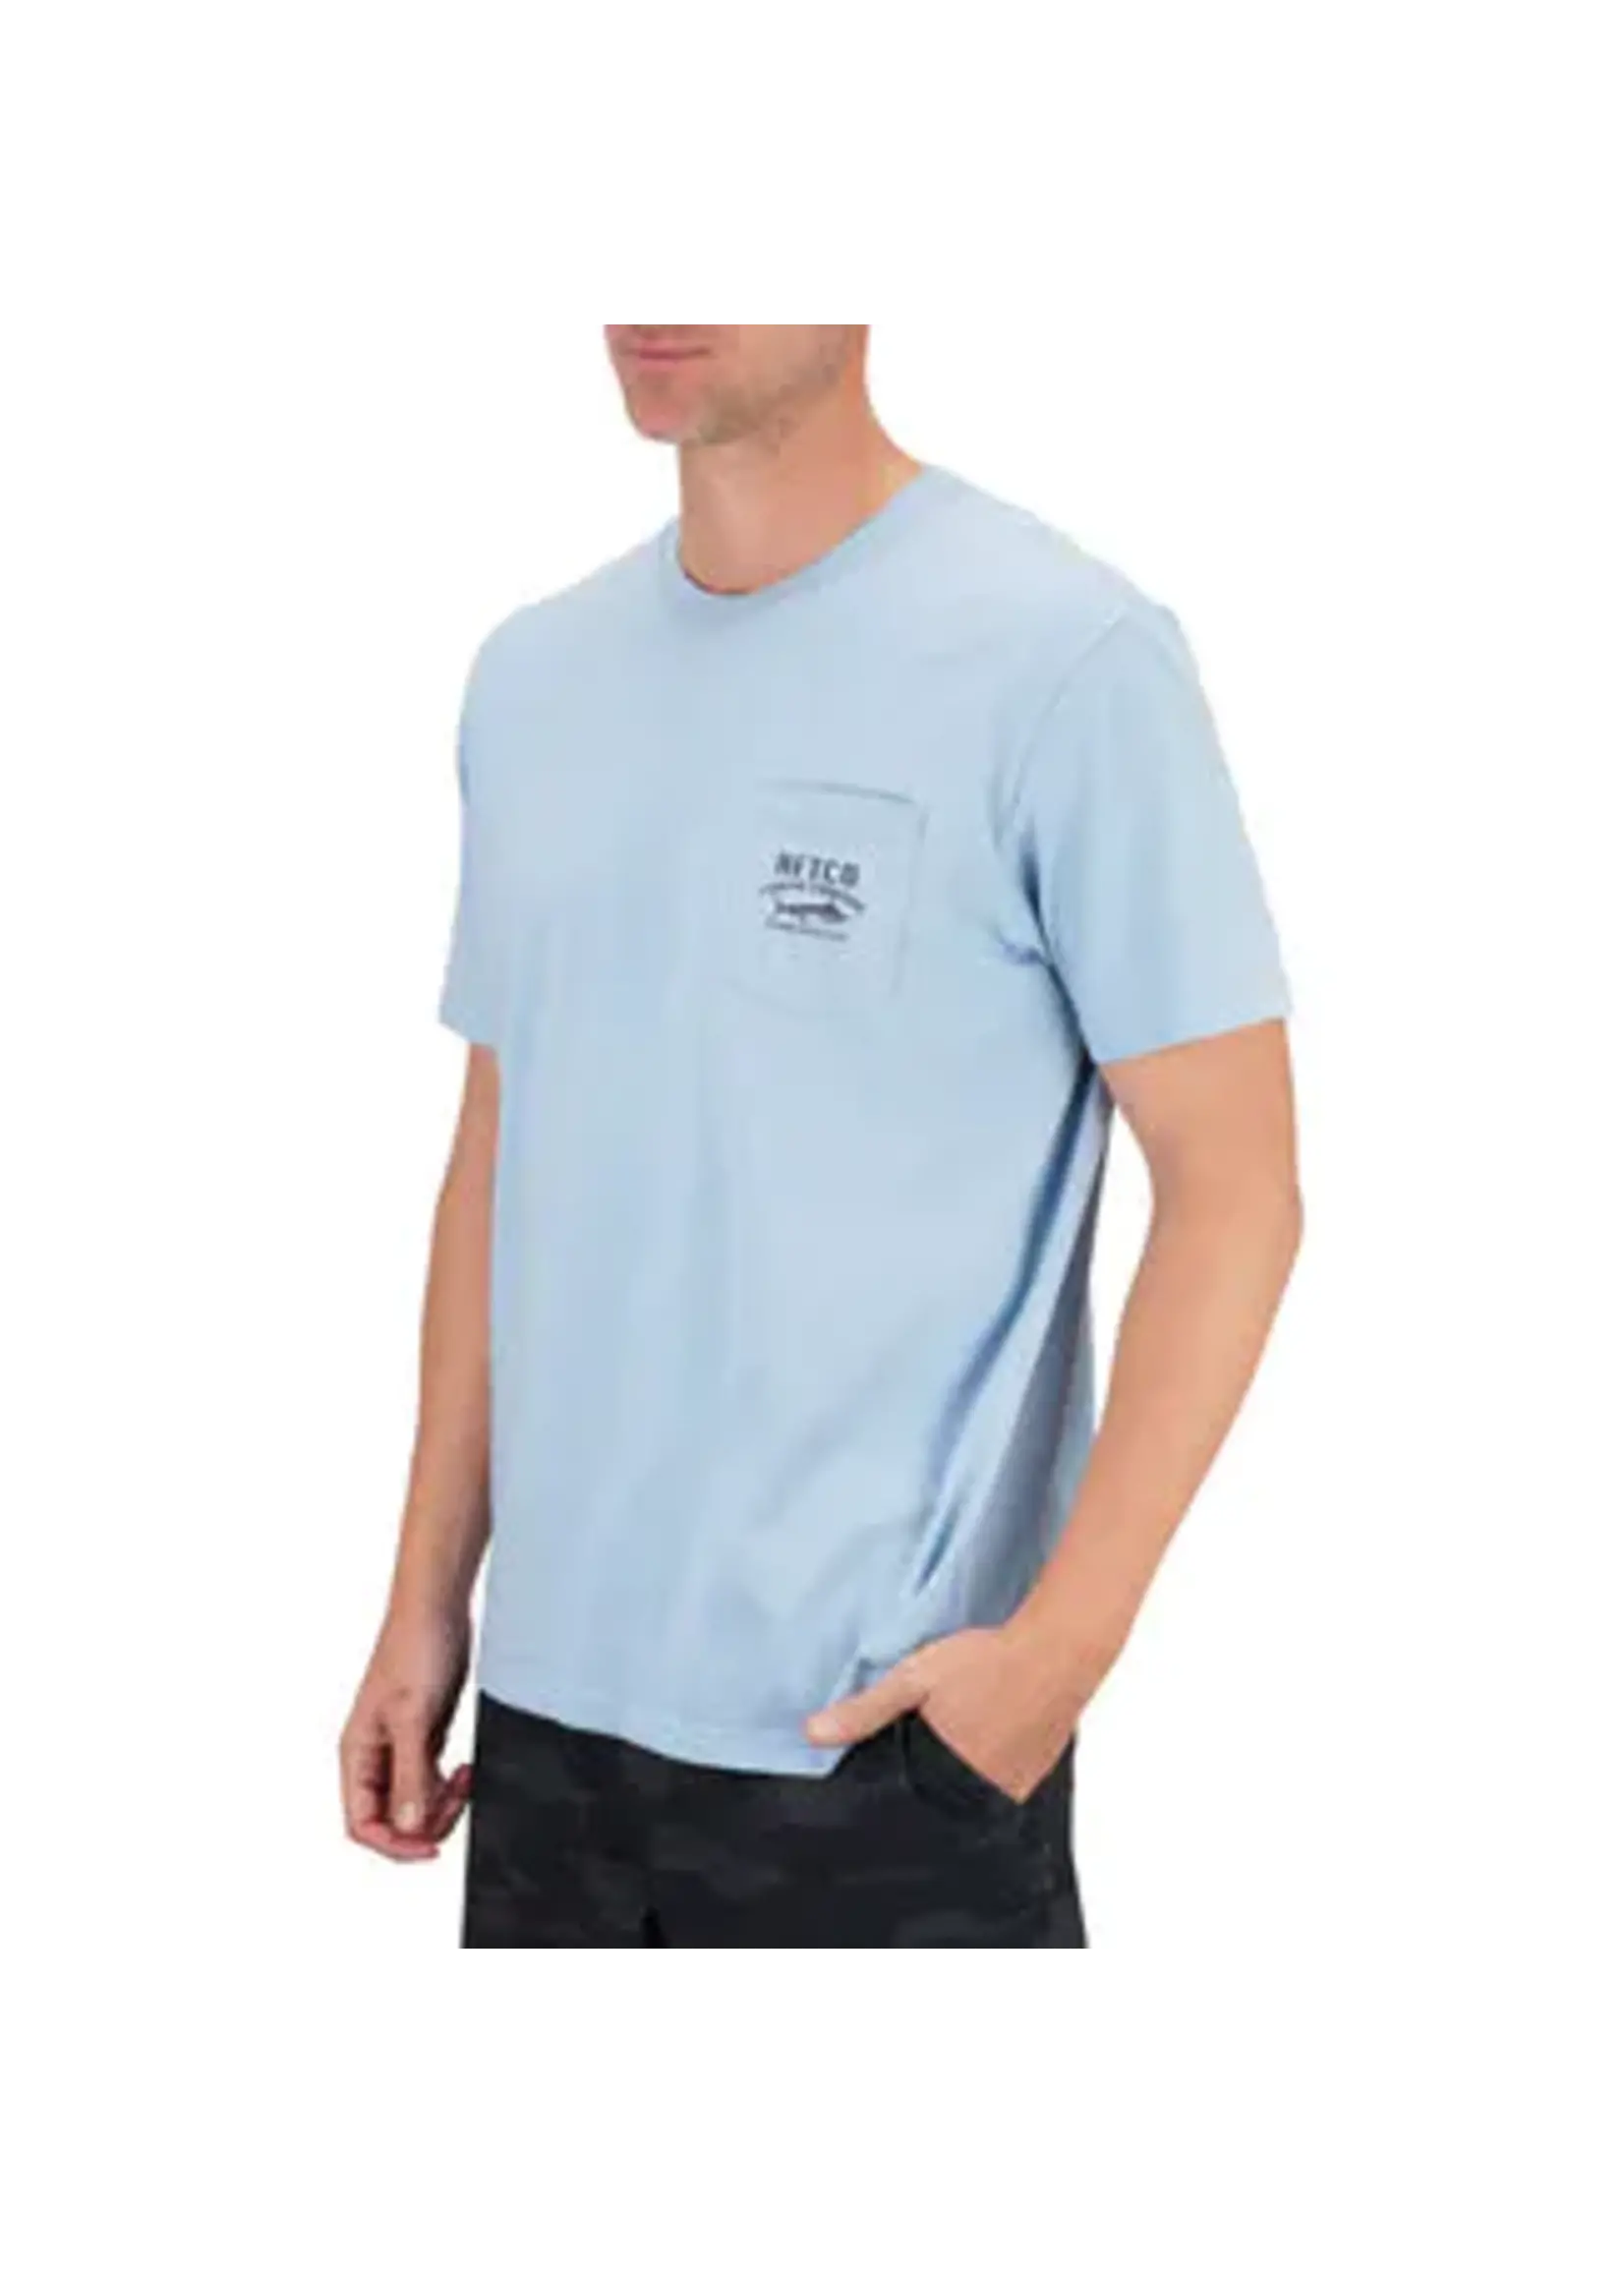 AFTCO Fishing Charters SS T Shirt